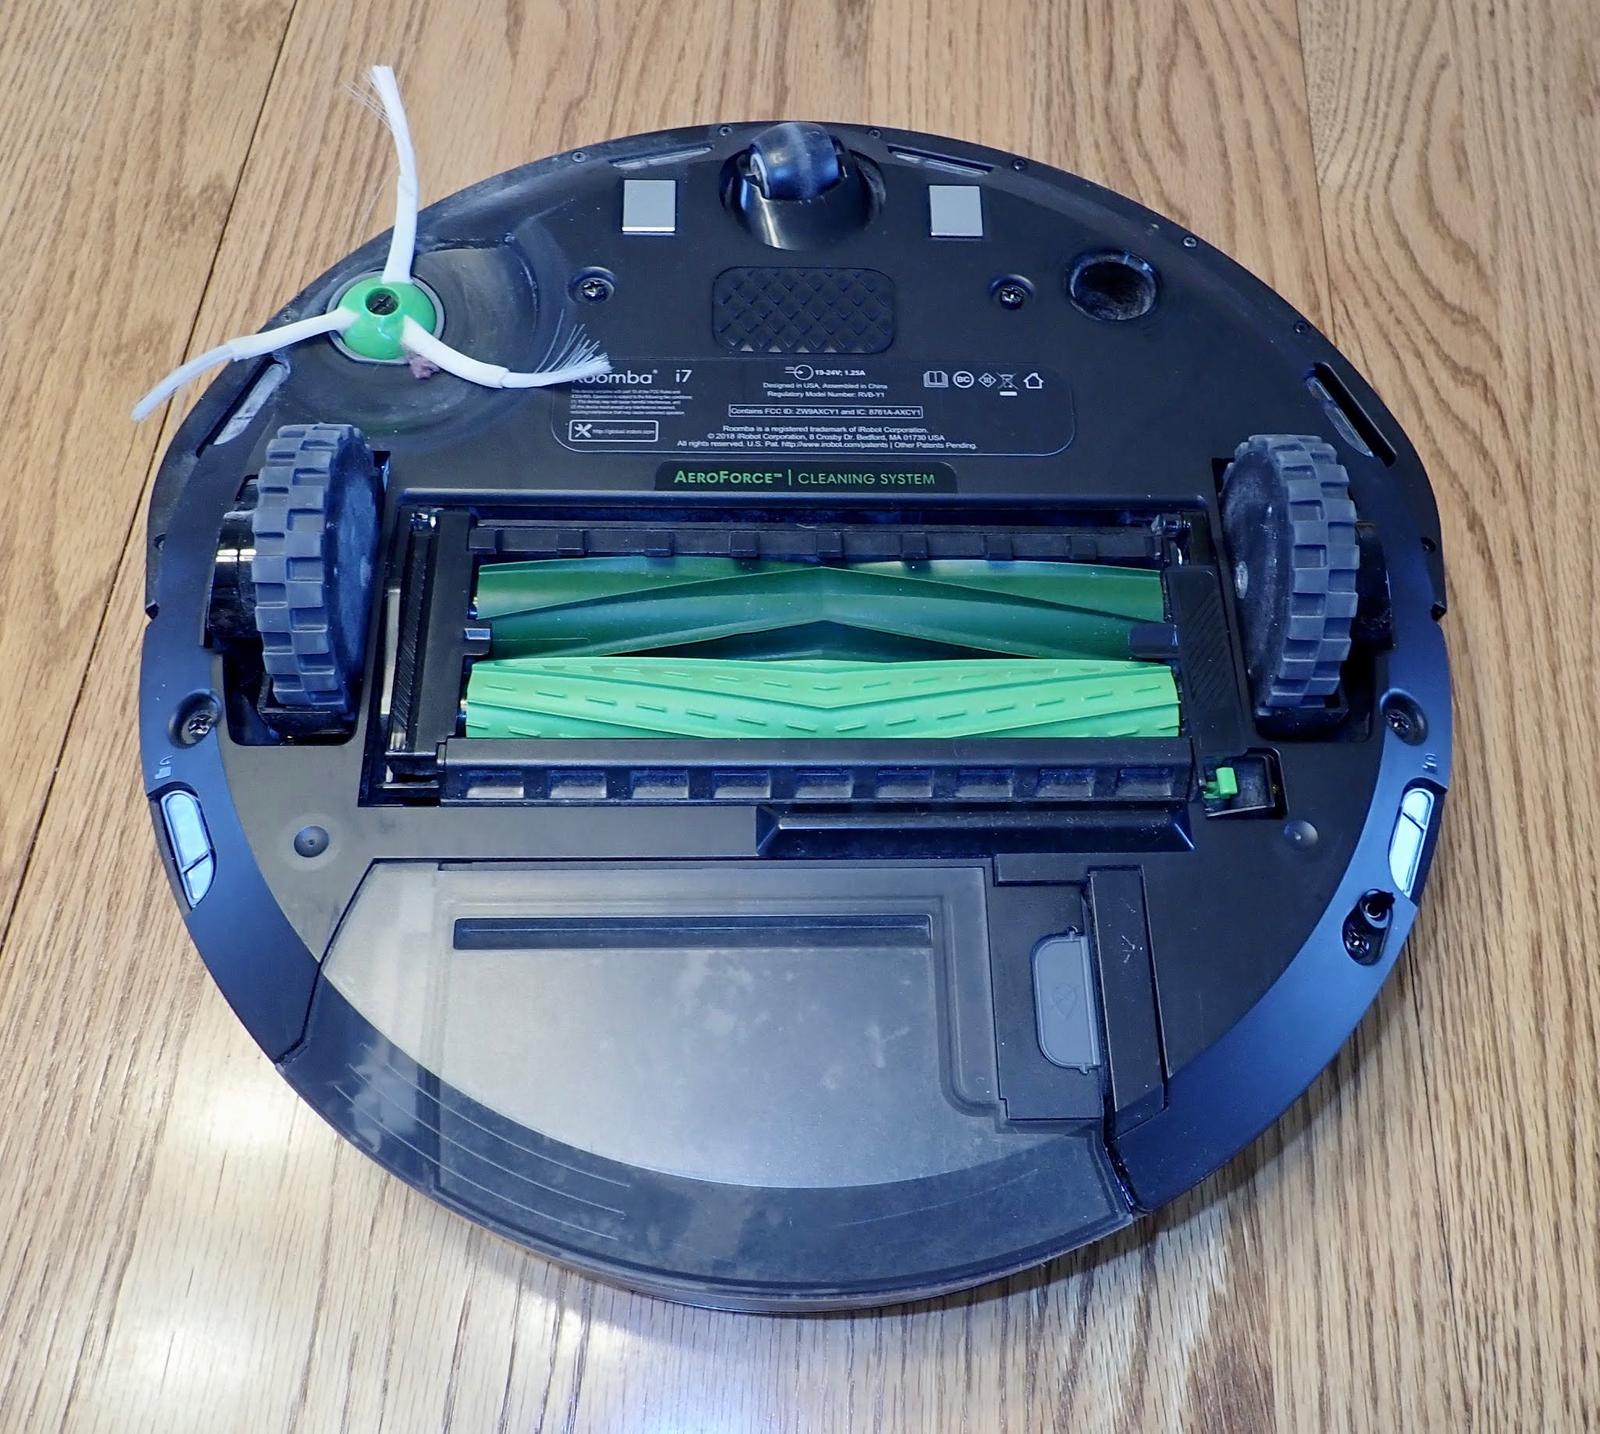 How To Replace The Battery - Air Filter - Side Brush and Rollers on your ROOMBA  i7 i7+ Robot Vacuum 